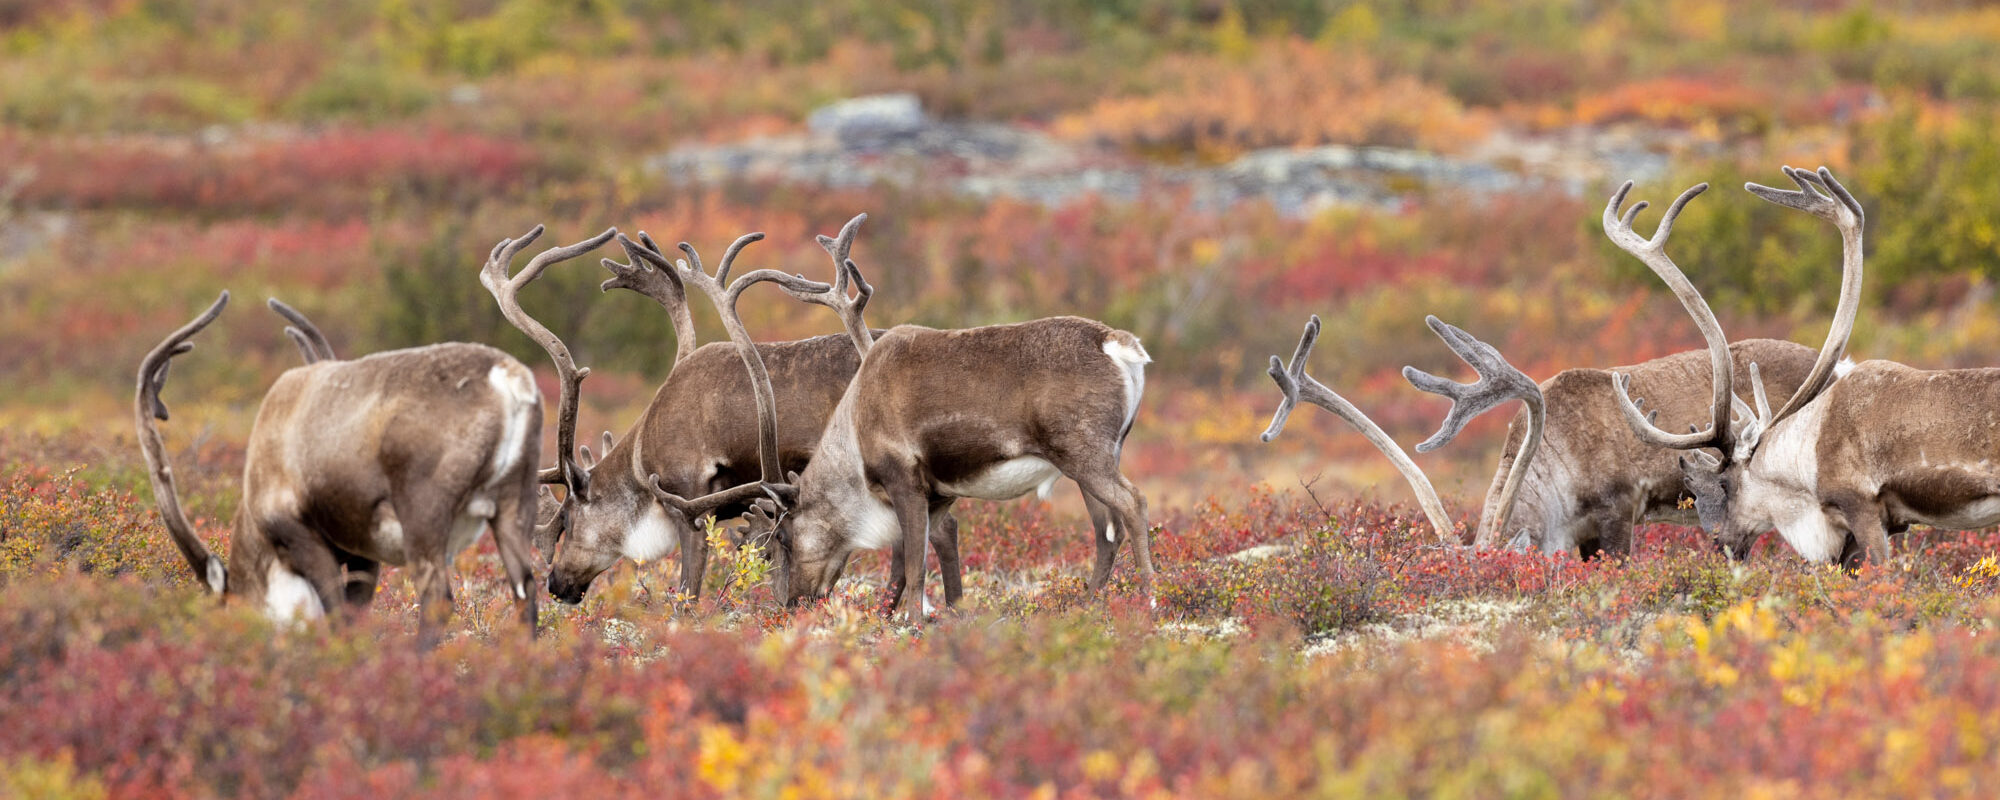 A photo of a small herd of caribou bulls grazing on the barrenlands surrounded by fall colours taken by a photographer during an Arctic photography tour